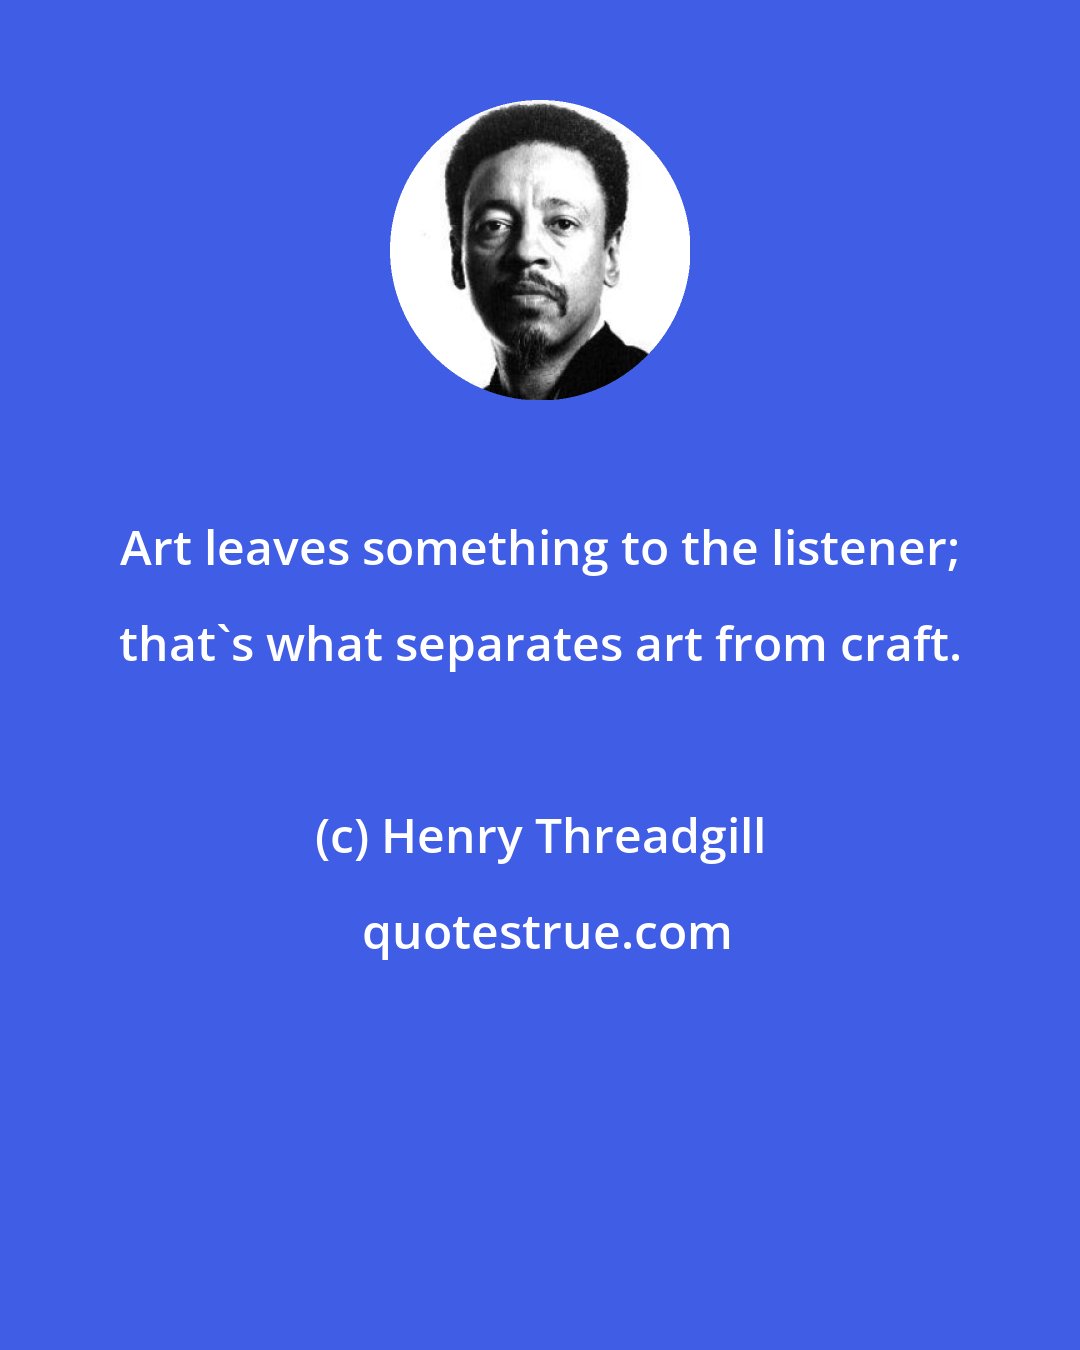 Henry Threadgill: Art leaves something to the listener; that's what separates art from craft.